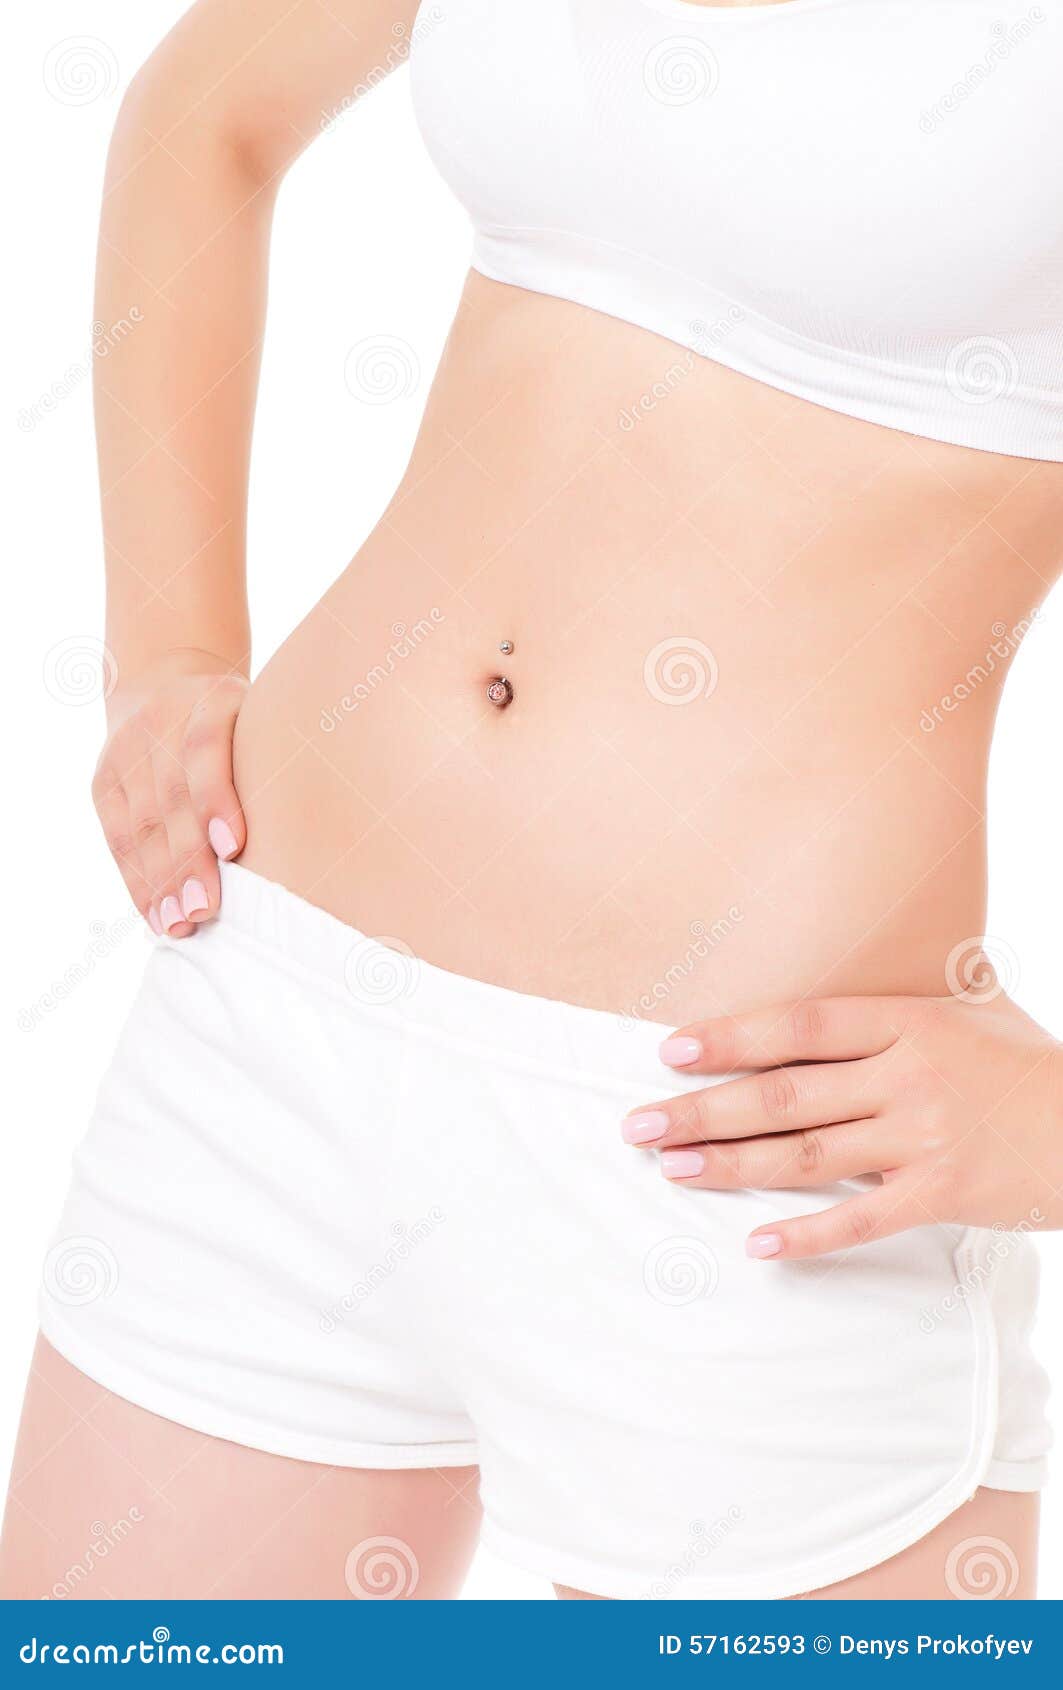 doug frye recommends belly piercing on fat stomach pic